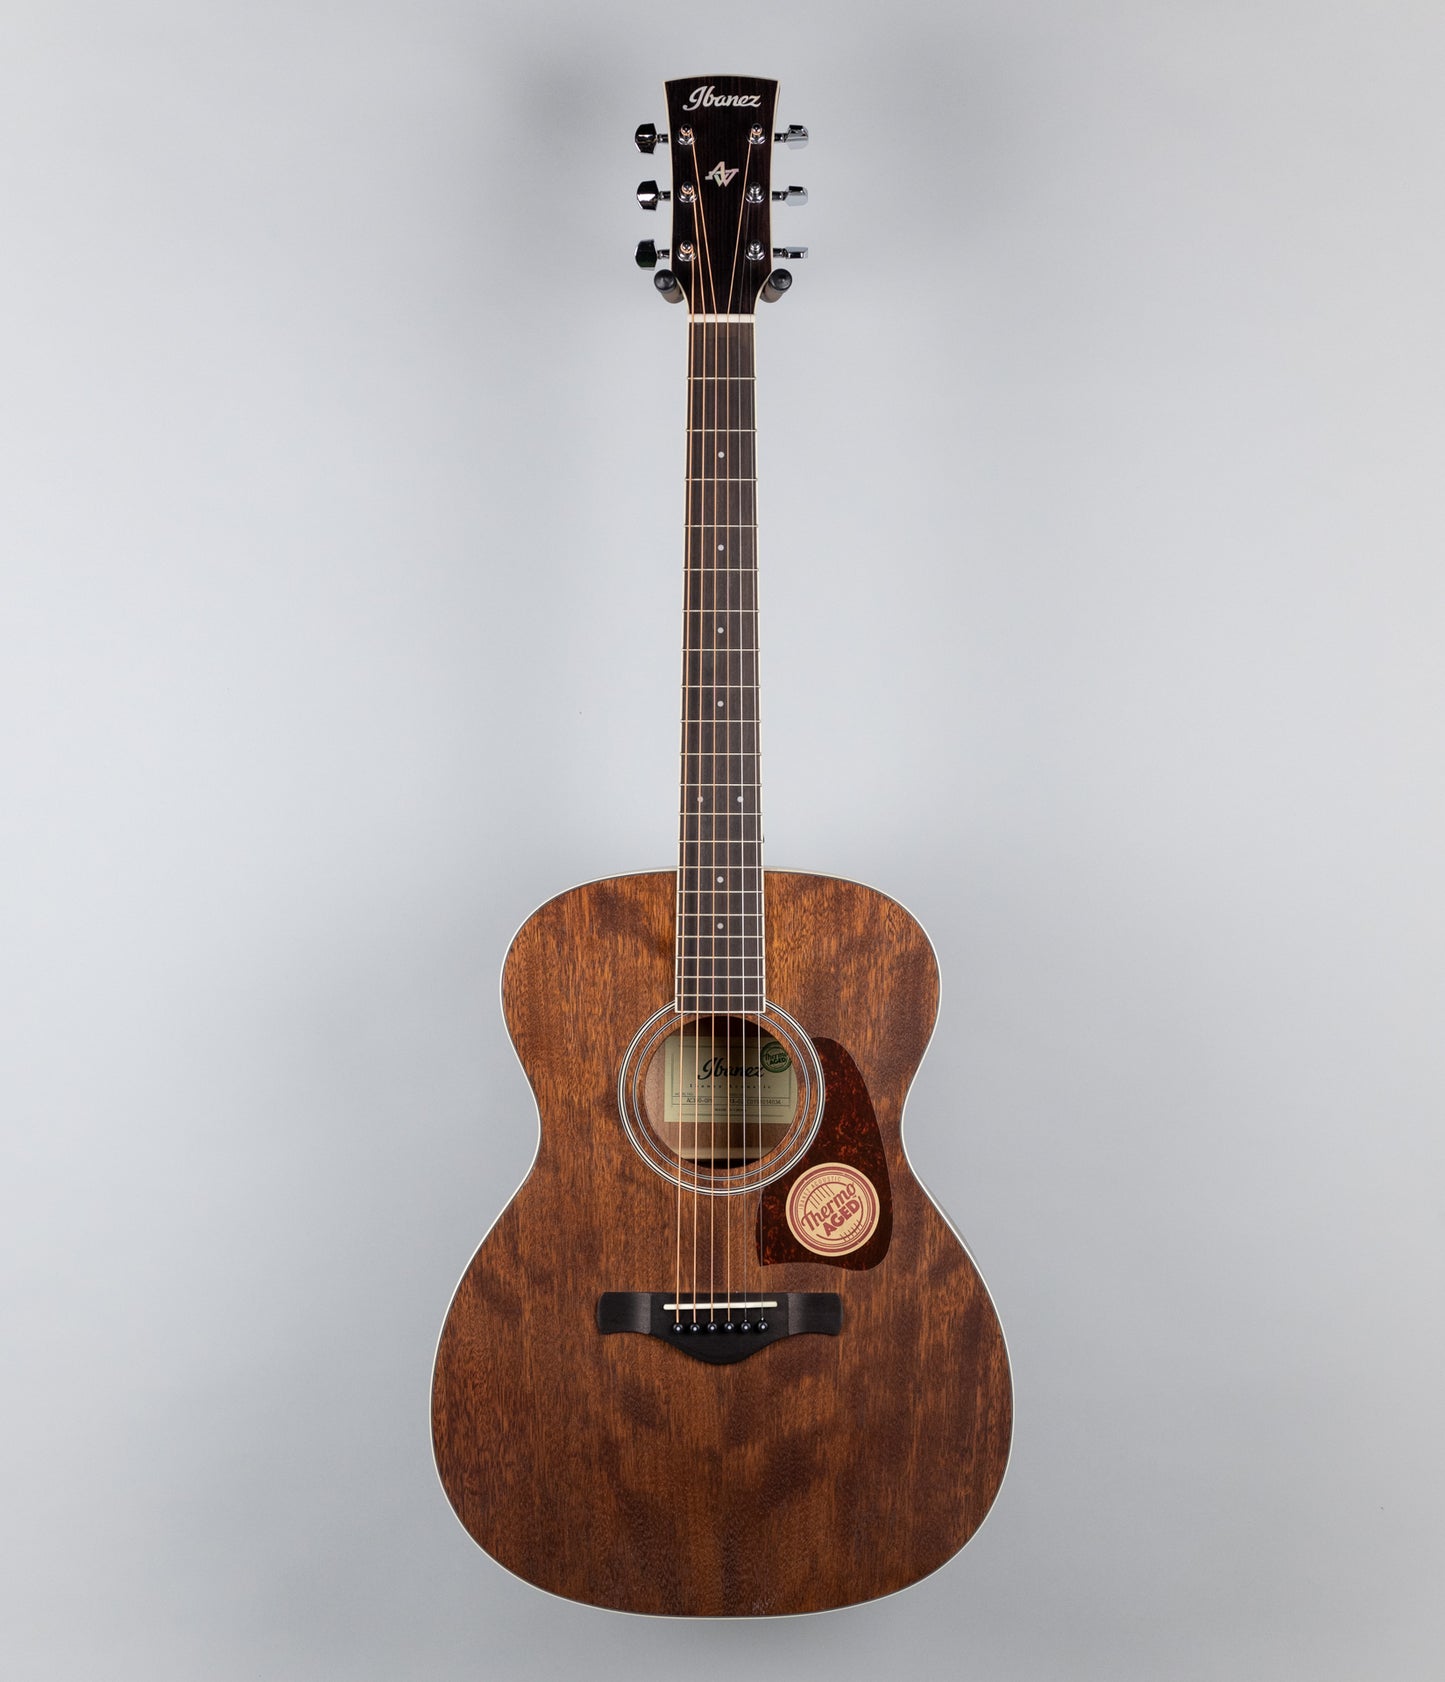 Ibanez AC340-OPN Acoustic Guitar in Open Pore Natural